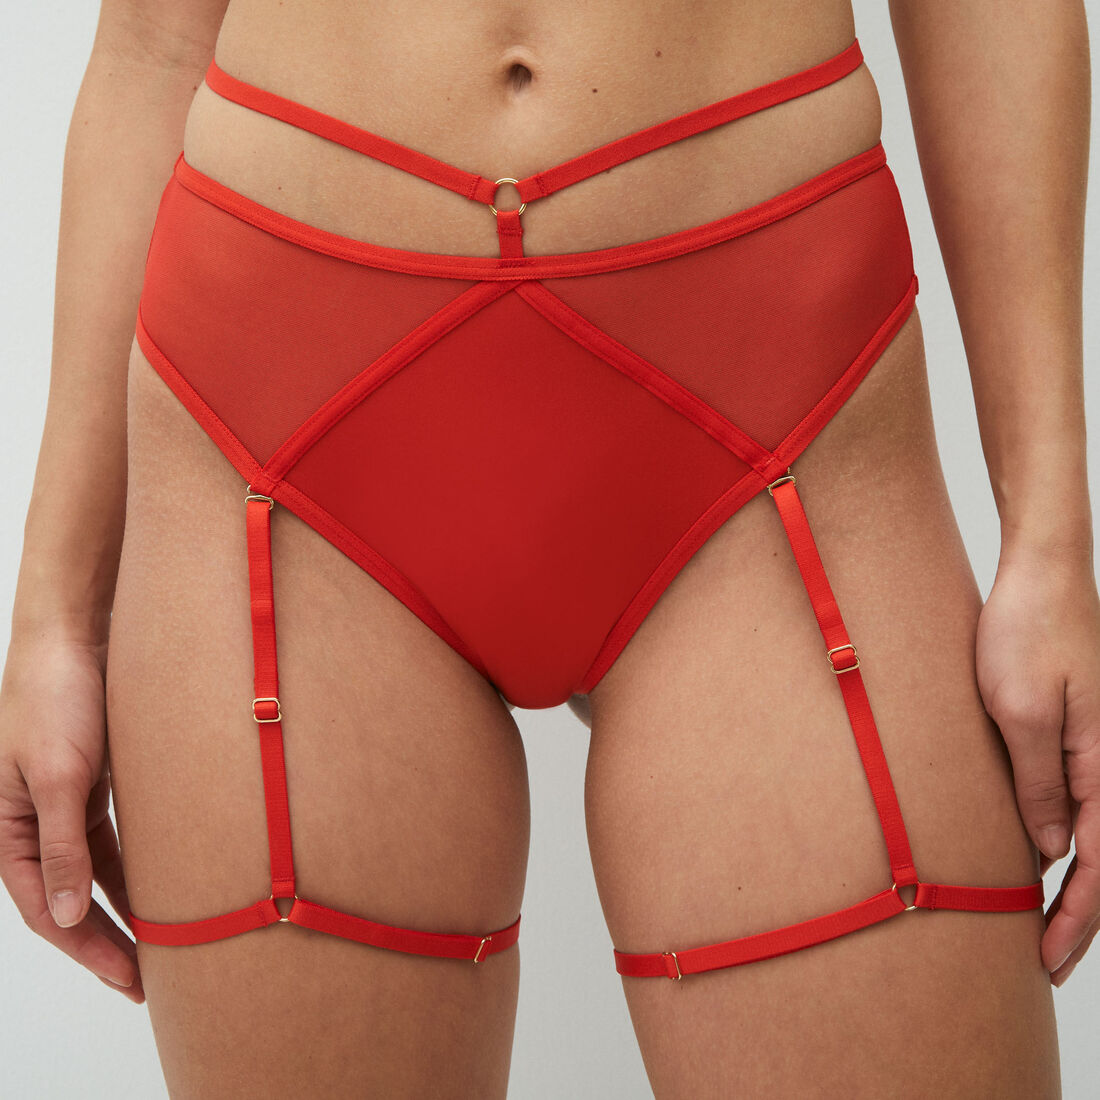 high-waisted tanga briefs in recycled micro-mesh and suspender belt;